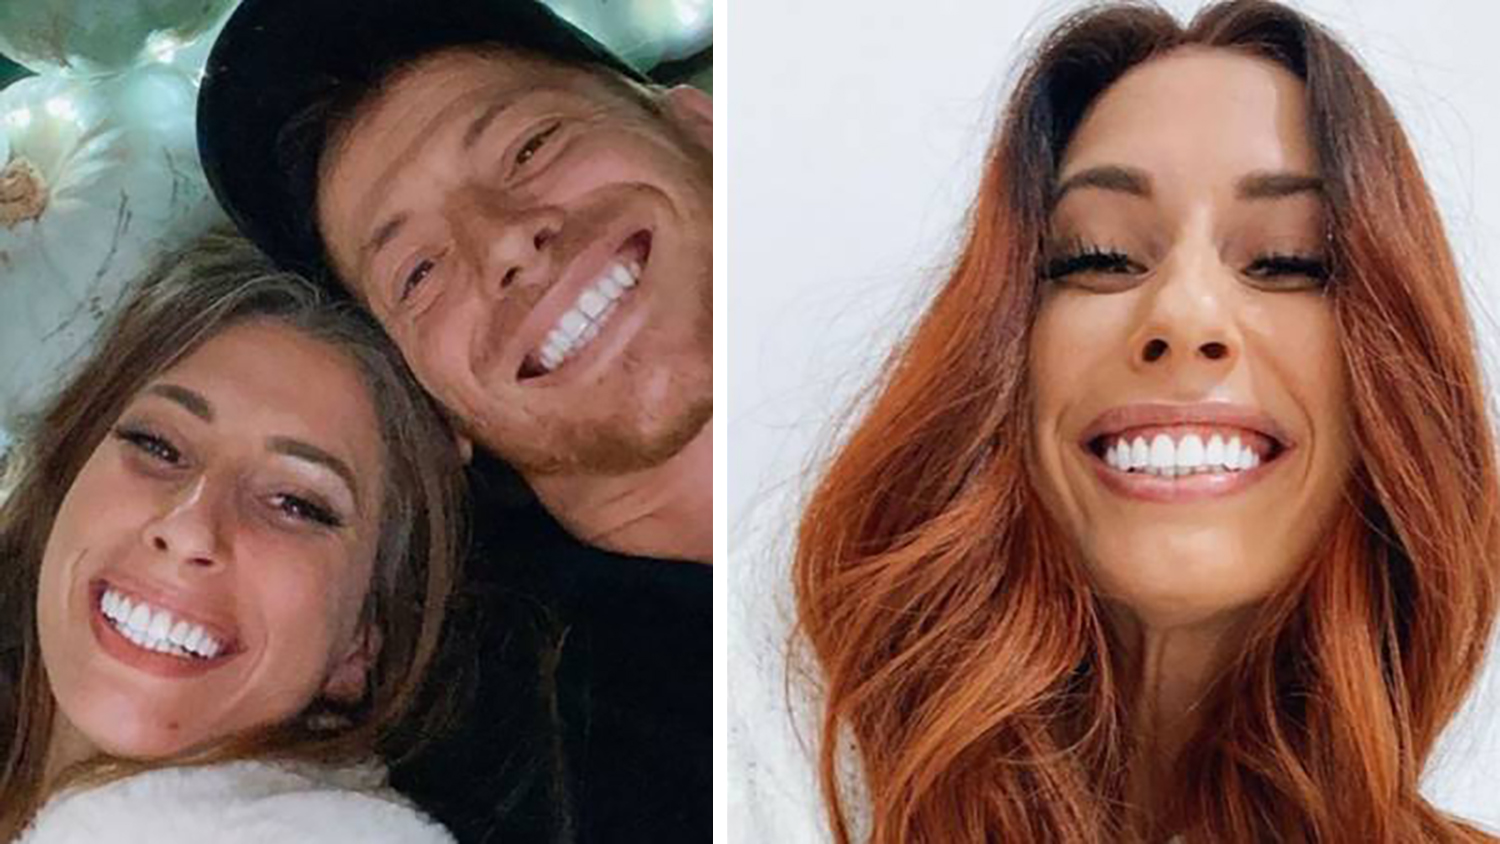 stacey solomon woke up and found joe swash using her phone to watch porn